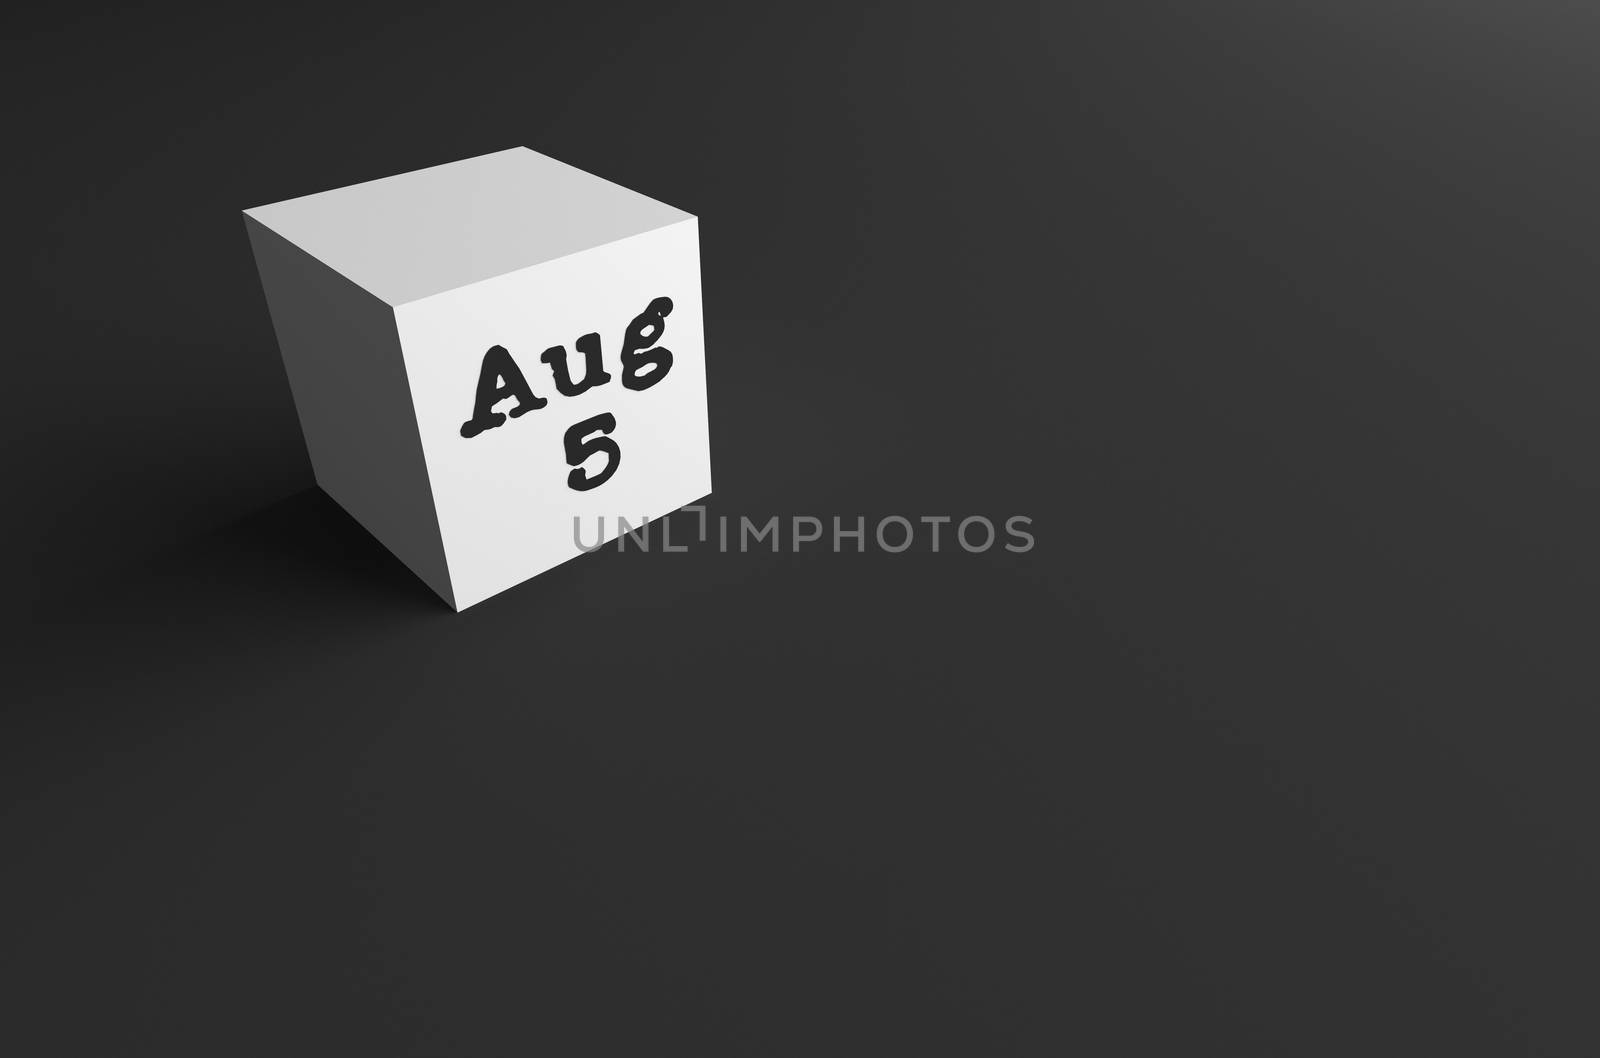 3D RENDERING OF Aug (ABBREVIATION OF AUGUST) 5 ON WHITE CUBE